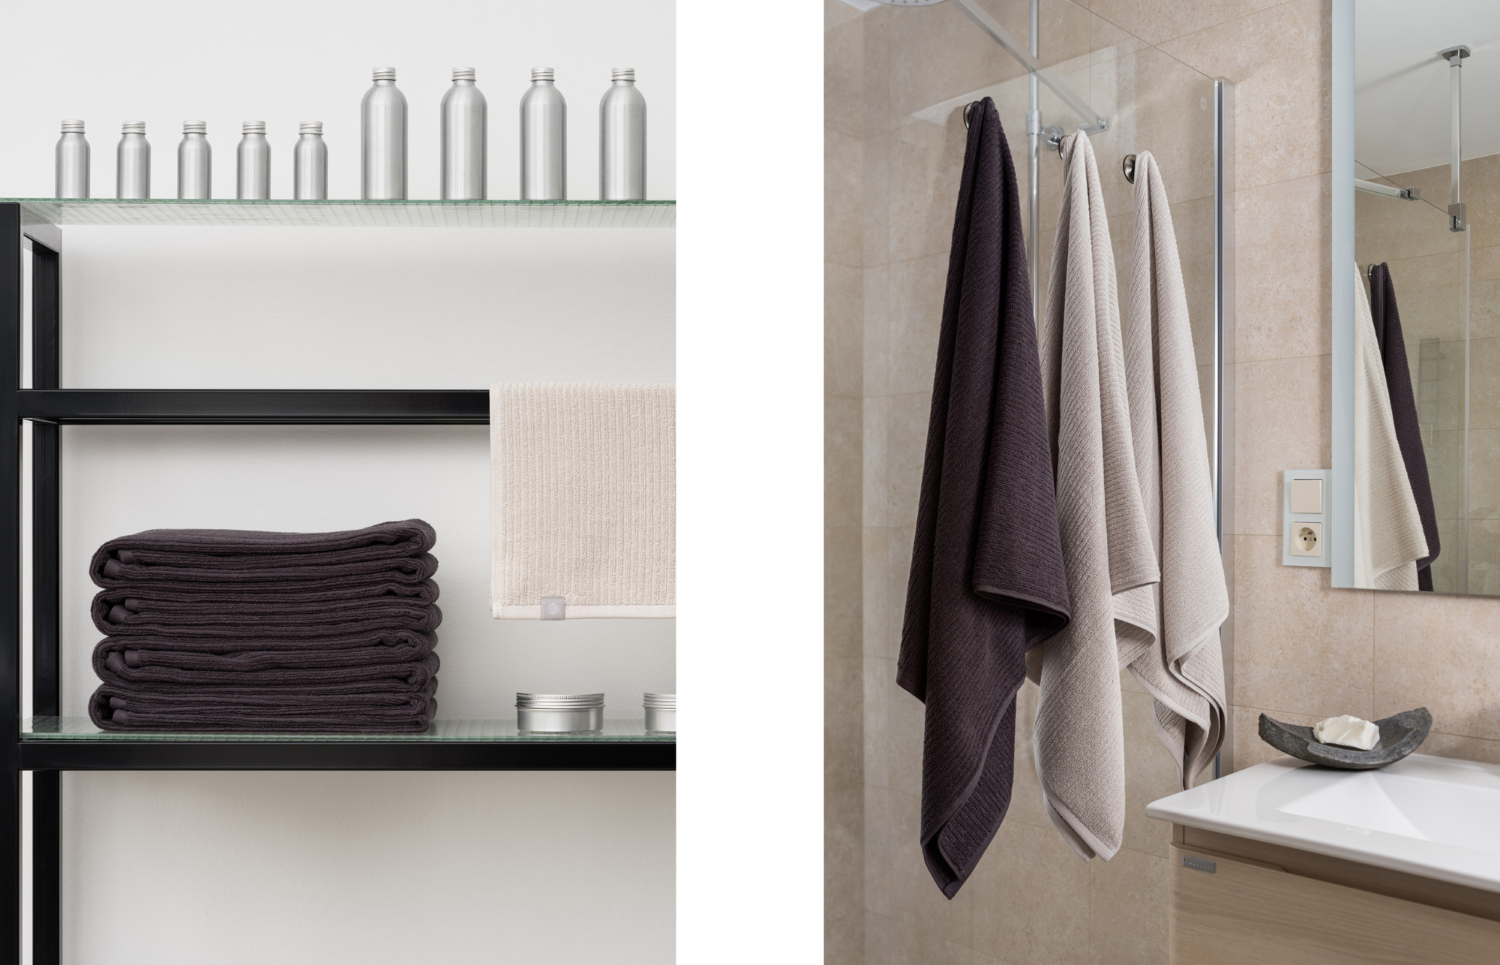 Lejaan towels are suitable for every occasion, just take your pick.